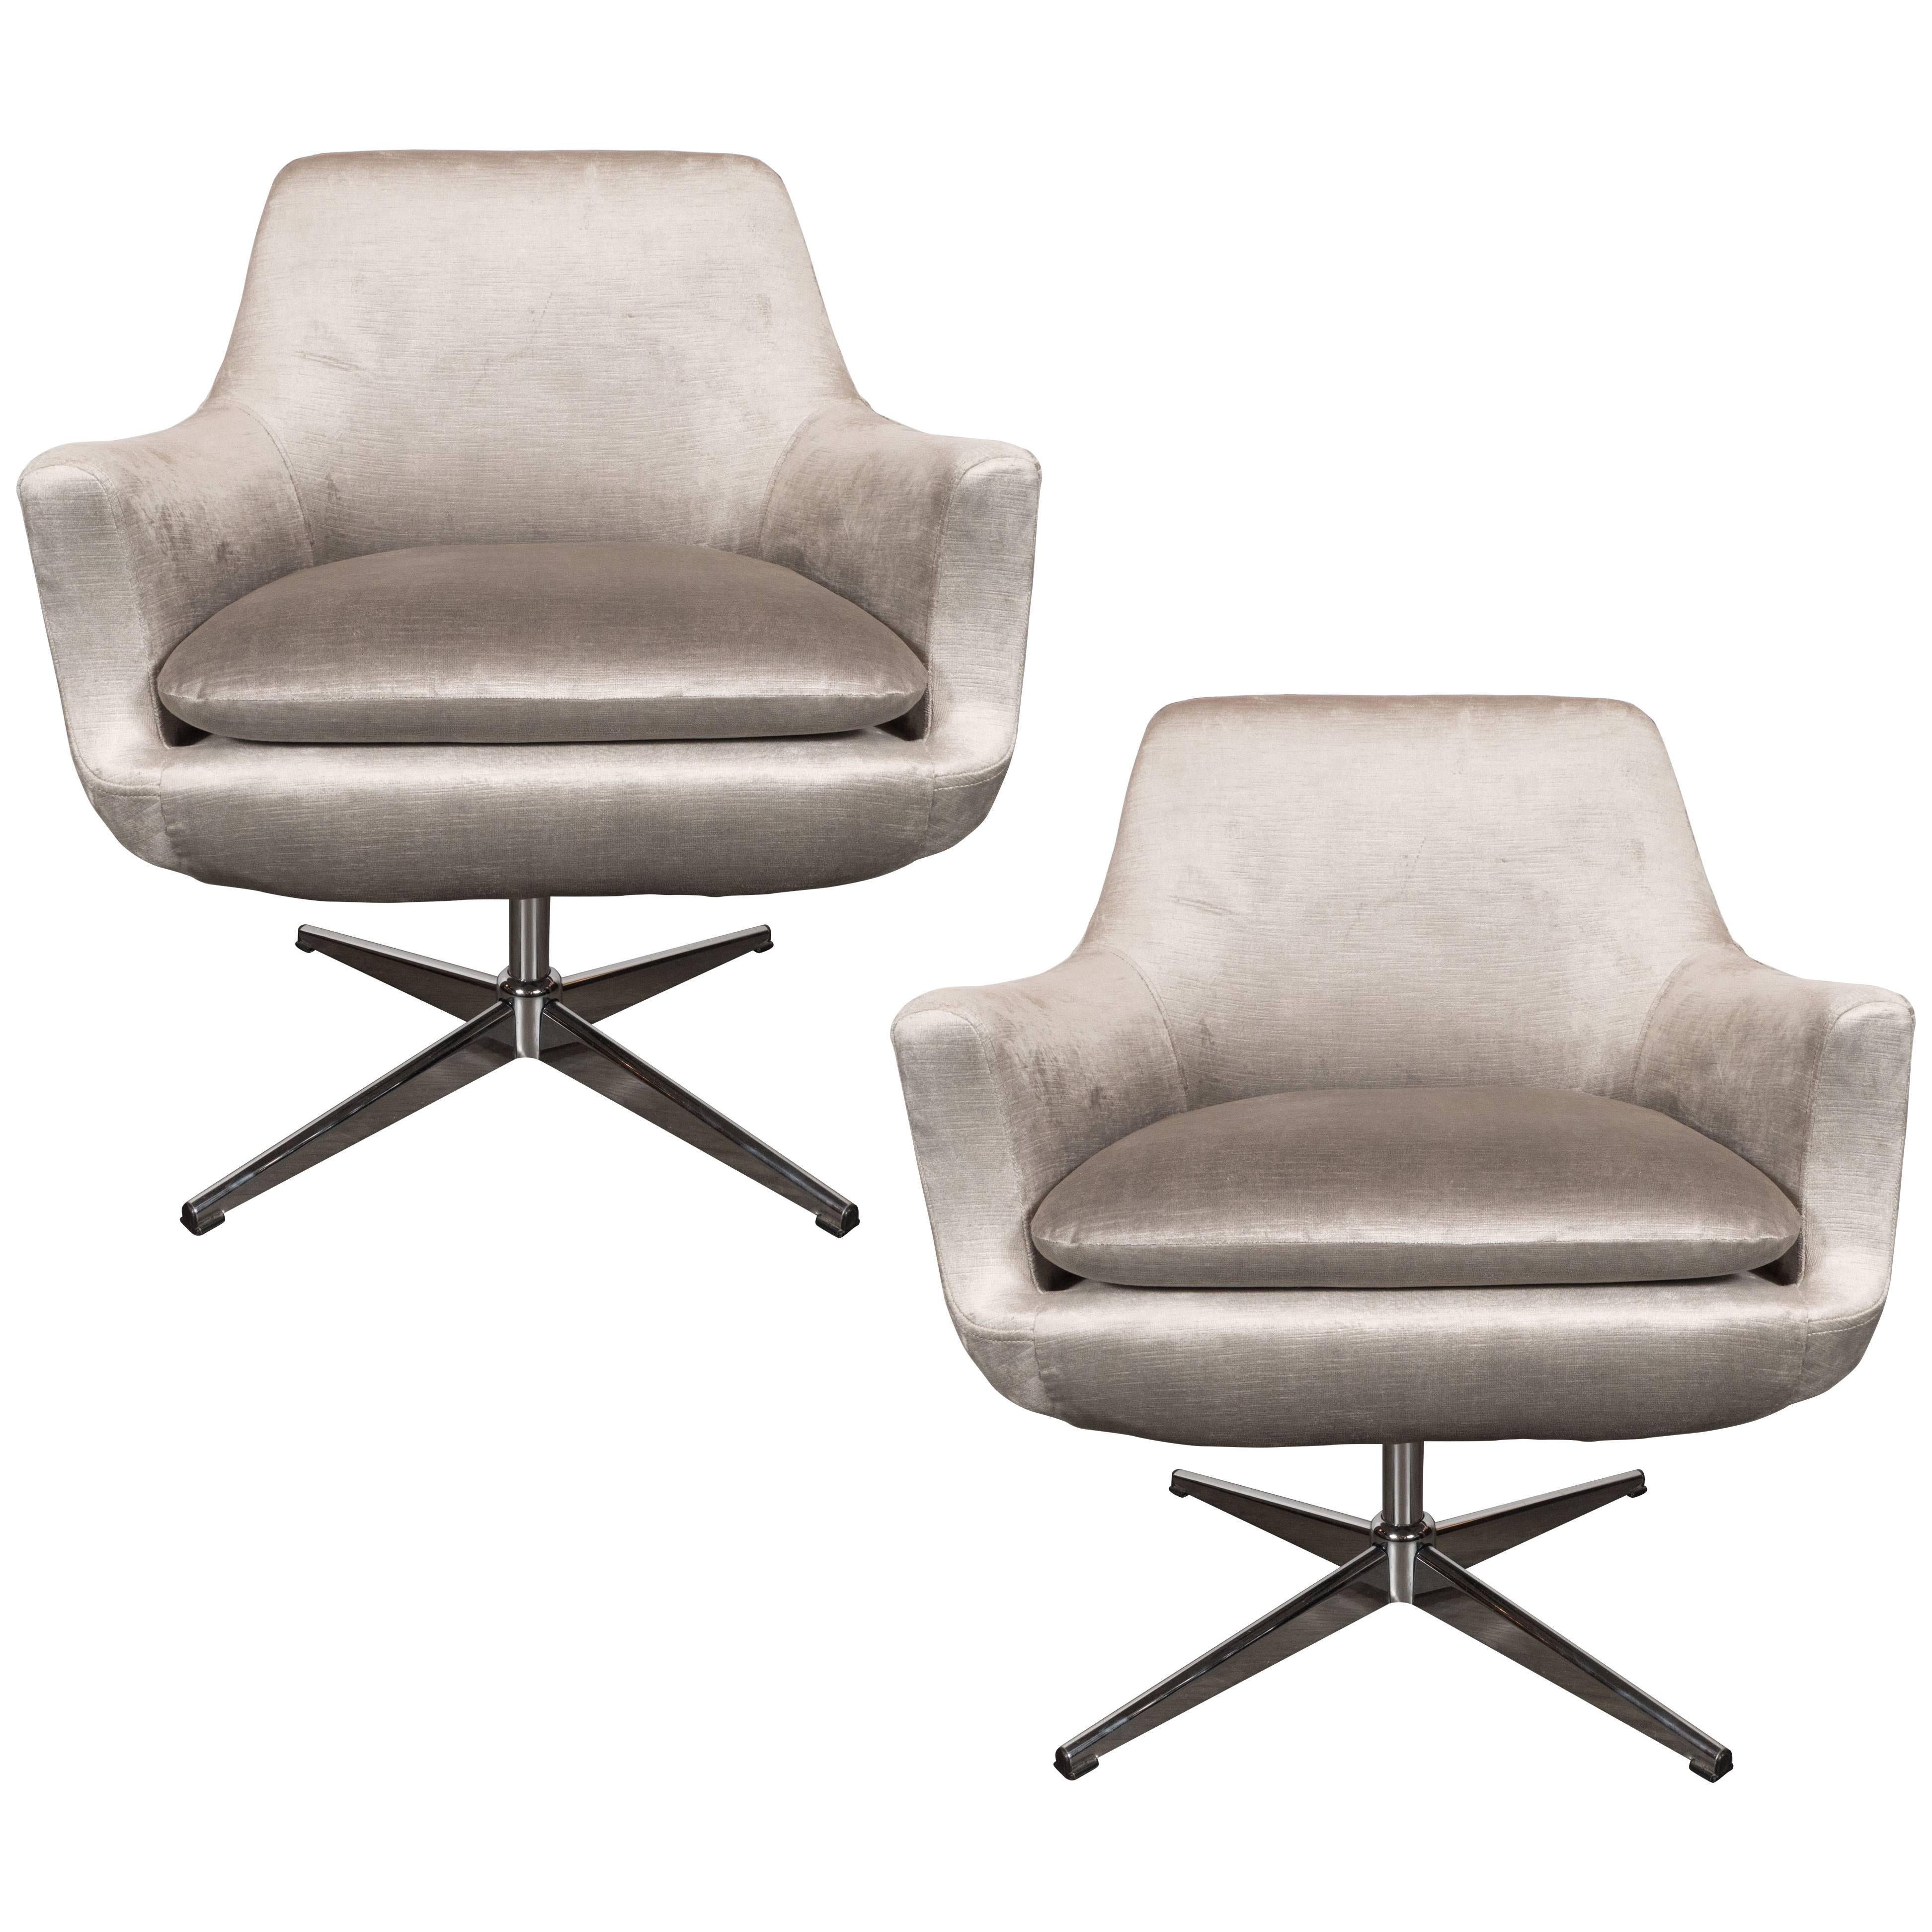 Pair of Mid-Century Modern Chrome and Smoked Pewter Velvet Swivel Chairs